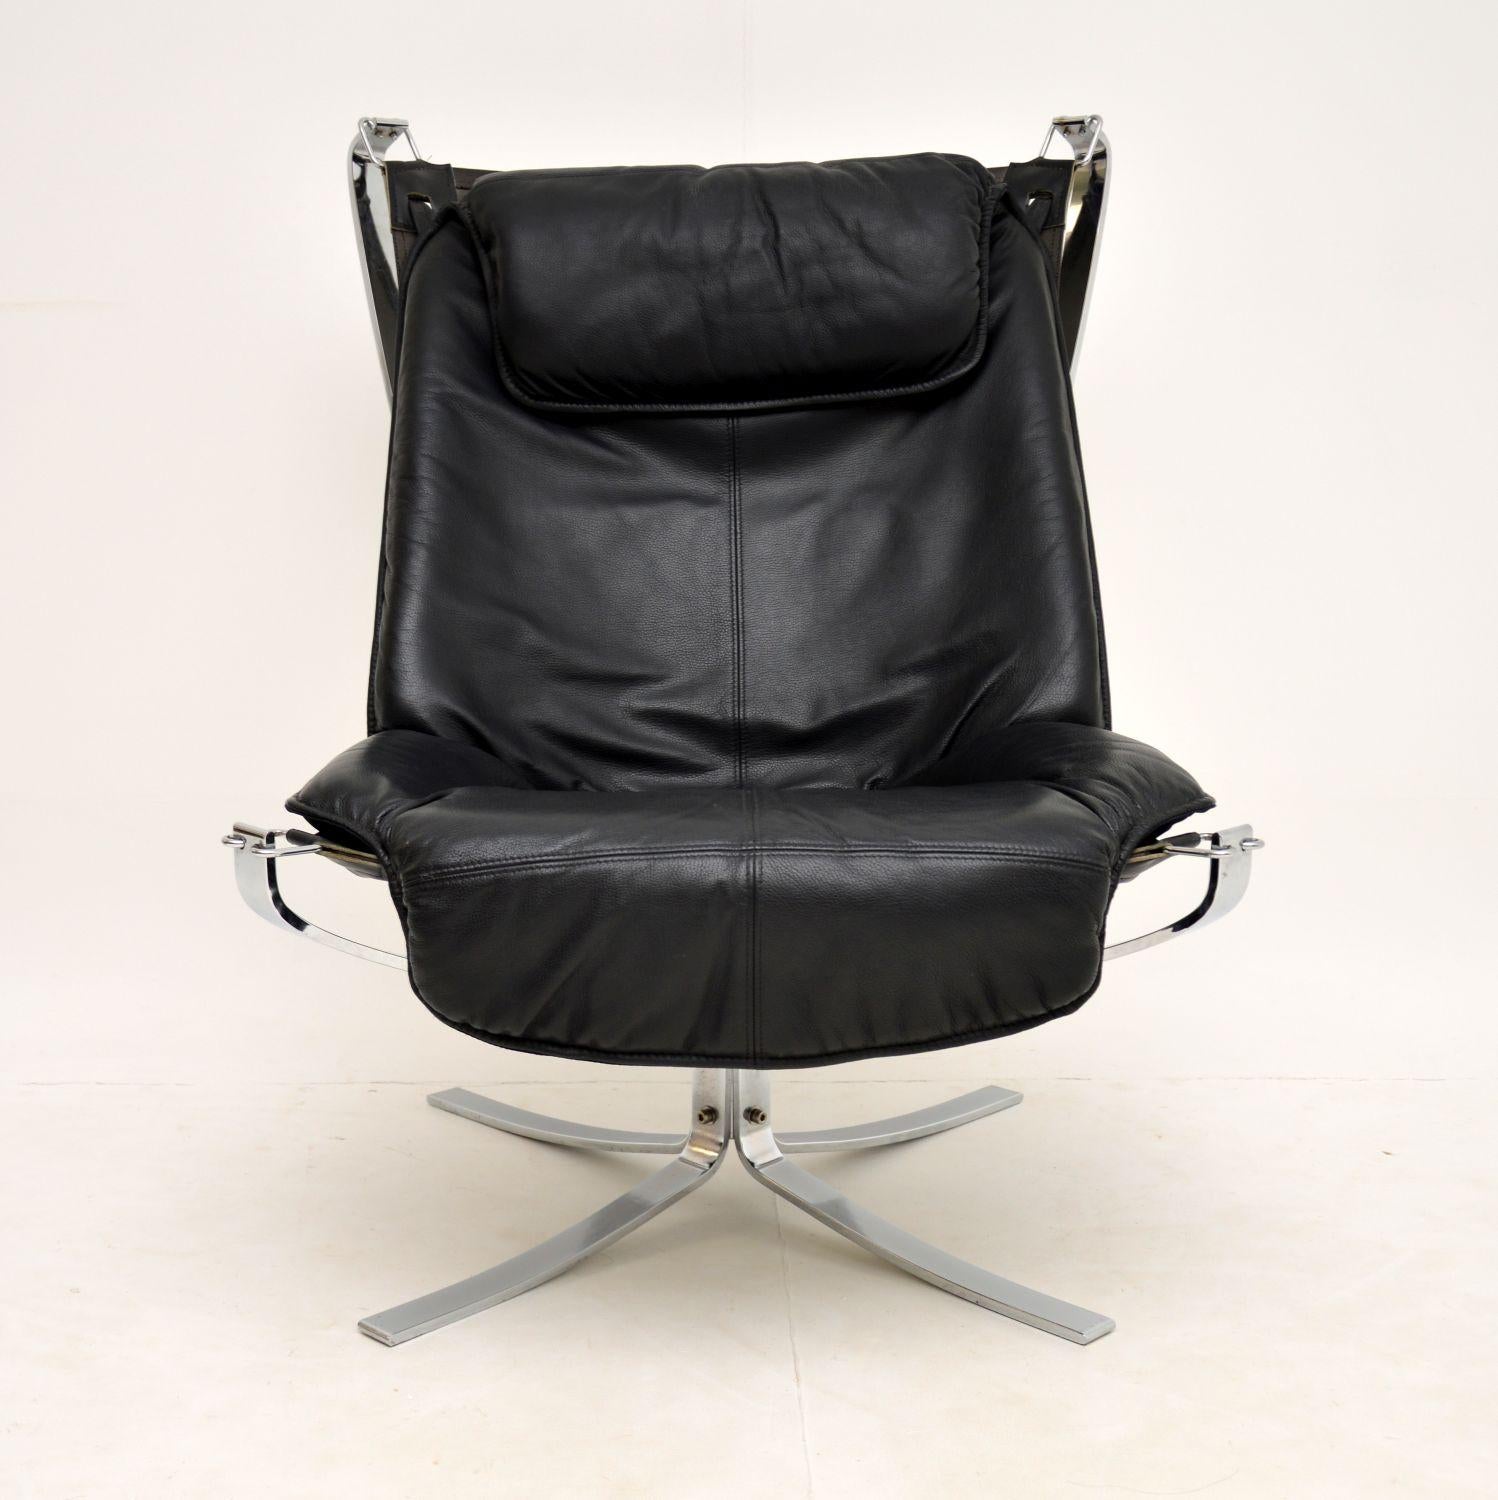 A stunning and top quality vintage Falcon chair, beautifully made from chromed steel and leather. Originally designed by Sigurd Ressell and produced by Vatne Mobler in Norway, this is a later production and dates from the late 20th century.

It is